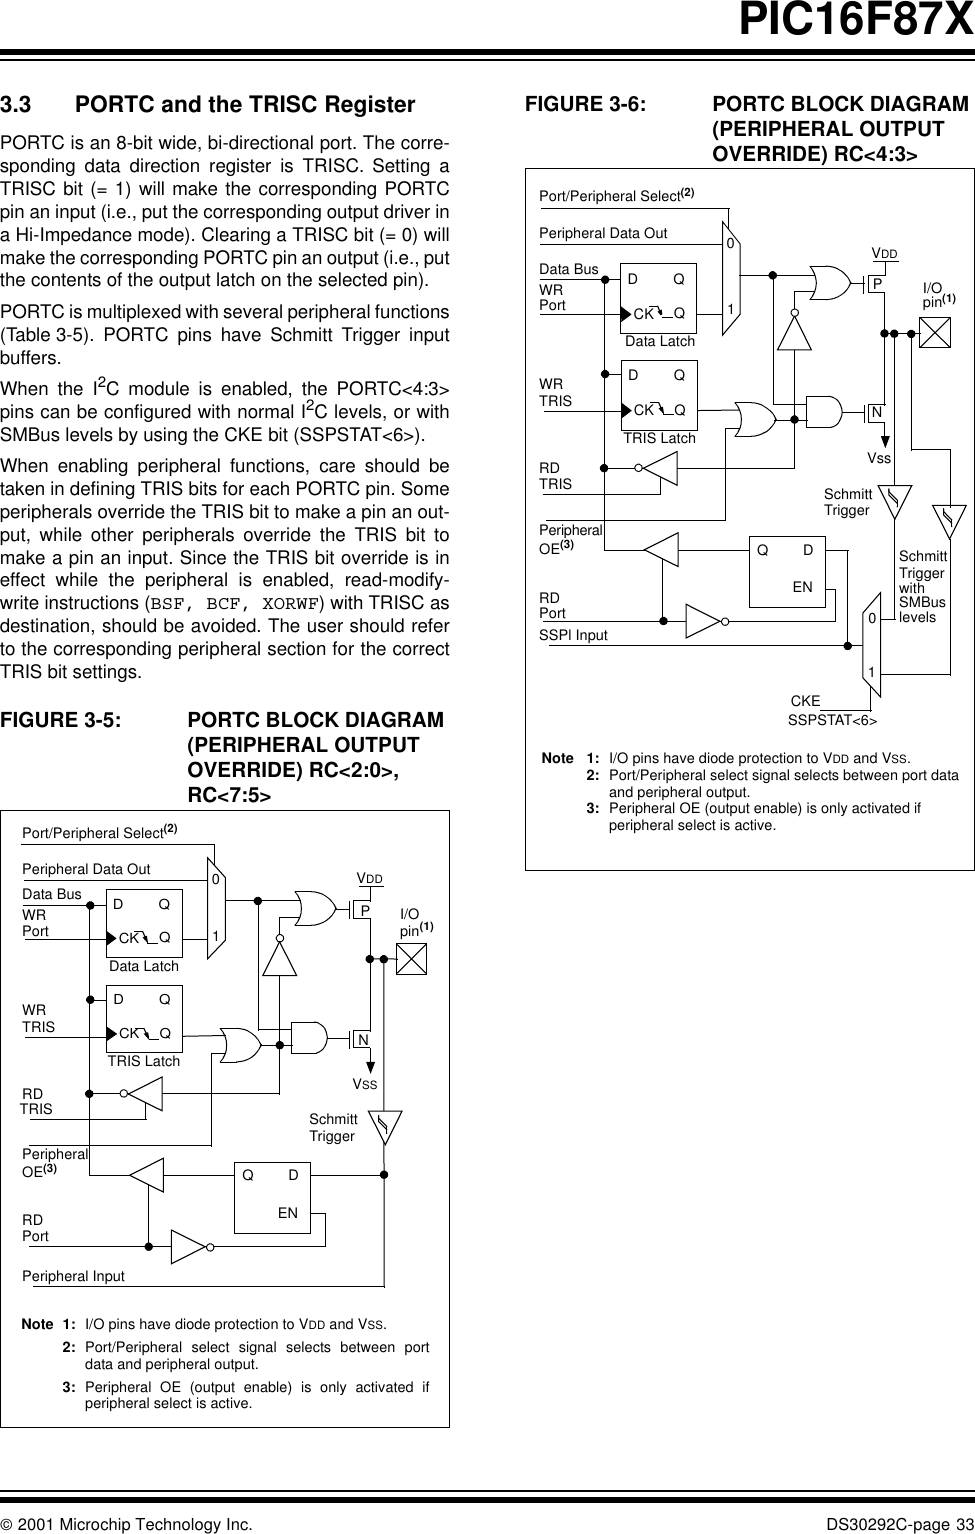  2001 Microchip Technology Inc. DS30292C-page 33PIC16F87X3.3 PORTC and the TRISC RegisterPORTC is an 8-bit wide, bi-directional port. The corre-sponding data direction register is TRISC. Setting aTRISC bit (= 1) will make the corresponding PORTCpin an input (i.e., put the corresponding output driver ina Hi-Impedance mode). Clearing a TRISC bit (= 0) willmake the corresponding PORTC pin an output (i.e., putthe contents of the output latch on the selected pin).PORTC is multiplexed with several peripheral functions(Table 3-5). PORTC pins have Schmitt Trigger inputbuffers.When the I2C module is enabled, the PORTC&lt;4:3&gt;pins can be configured with normal I2C levels, or withSMBus levels by using the CKE bit (SSPSTAT&lt;6&gt;).When enabling peripheral functions, care should betaken in defining TRIS bits for each PORTC pin. Someperipherals override the TRIS bit to make a pin an out-put, while other peripherals override the TRIS bit tomake a pin an input. Since the TRIS bit override is ineffect while the peripheral is enabled, read-modify-write instructions (BSF, BCF, XORWF) with TRISC asdestination, should be avoided. The user should referto the corresponding peripheral section for the correctTRIS bit settings.FIGURE 3-5: PORTC BLOCK DIAGRAM (PERIPHERAL OUTPUT OVERRIDE) RC&lt;2:0&gt;, RC&lt;7:5&gt; FIGURE 3-6: PORTC BLOCK DIAGRAM (PERIPHERAL OUTPUT OVERRIDE) RC&lt;4:3&gt;Port/Peripheral Select(2)Data BusWRPortWRTRISRD Data LatchTRIS LatchRD SchmittTriggerQDQCKQDENPeripheral Data Out 01QDQCKPNVDDVSSPortPeripheralOE(3)Peripheral InputI/Opin(1)Note 1: I/O pins have diode protection to VDD and VSS.2: Port/Peripheral select signal selects between portdata and peripheral output.3: Peripheral OE (output enable) is only activated ifperipheral select is active.TRISPort/Peripheral Select(2)Data BusWRPortWRTRISRD Data LatchTRIS LatchRD SchmittTriggerQDQCKQDENPeripheral Data Out 01QDQCKPNVDDVssPortPeripheralOE(3)SSPl InputI/Opin(1)Note 1: I/O pins have diode protection to VDD and VSS.2: Port/Peripheral select signal selects between port data and peripheral output.3: Peripheral OE (output enable) is only activated if peripheral select is active.01CKESSPSTAT&lt;6&gt;SchmittTriggerwithSMBuslevelsTRIS